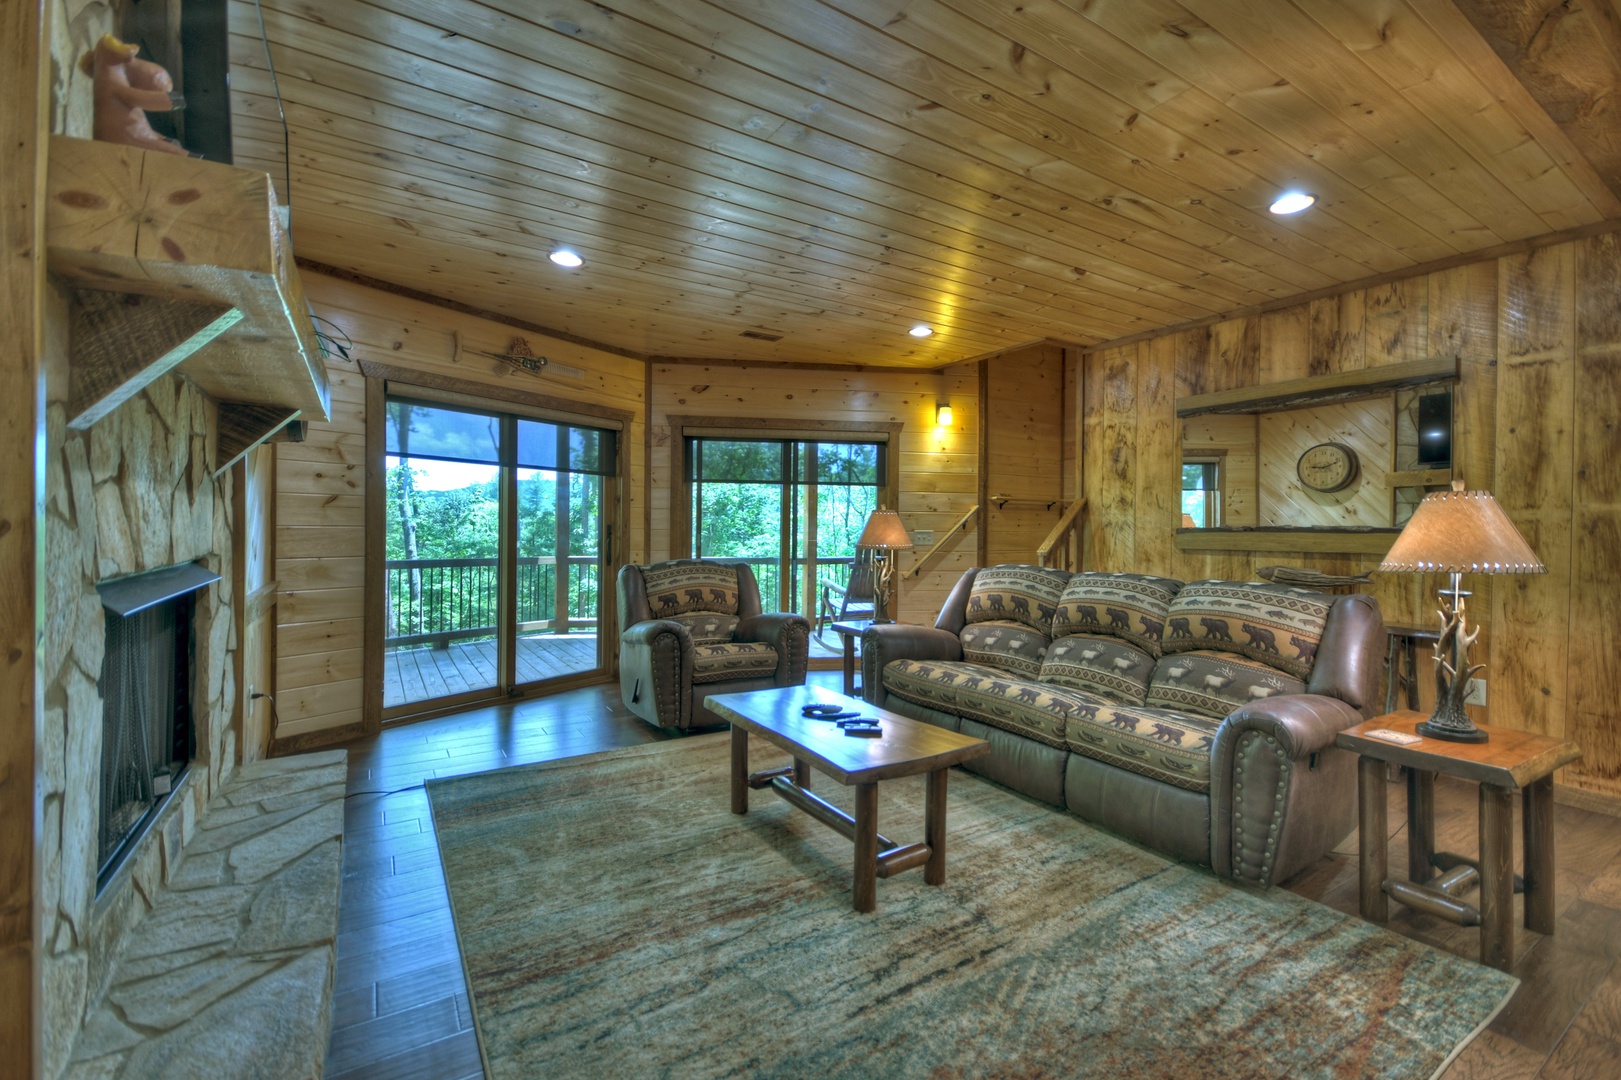 Deer Trails Cabin - Lower Level Living Room with Deck Access